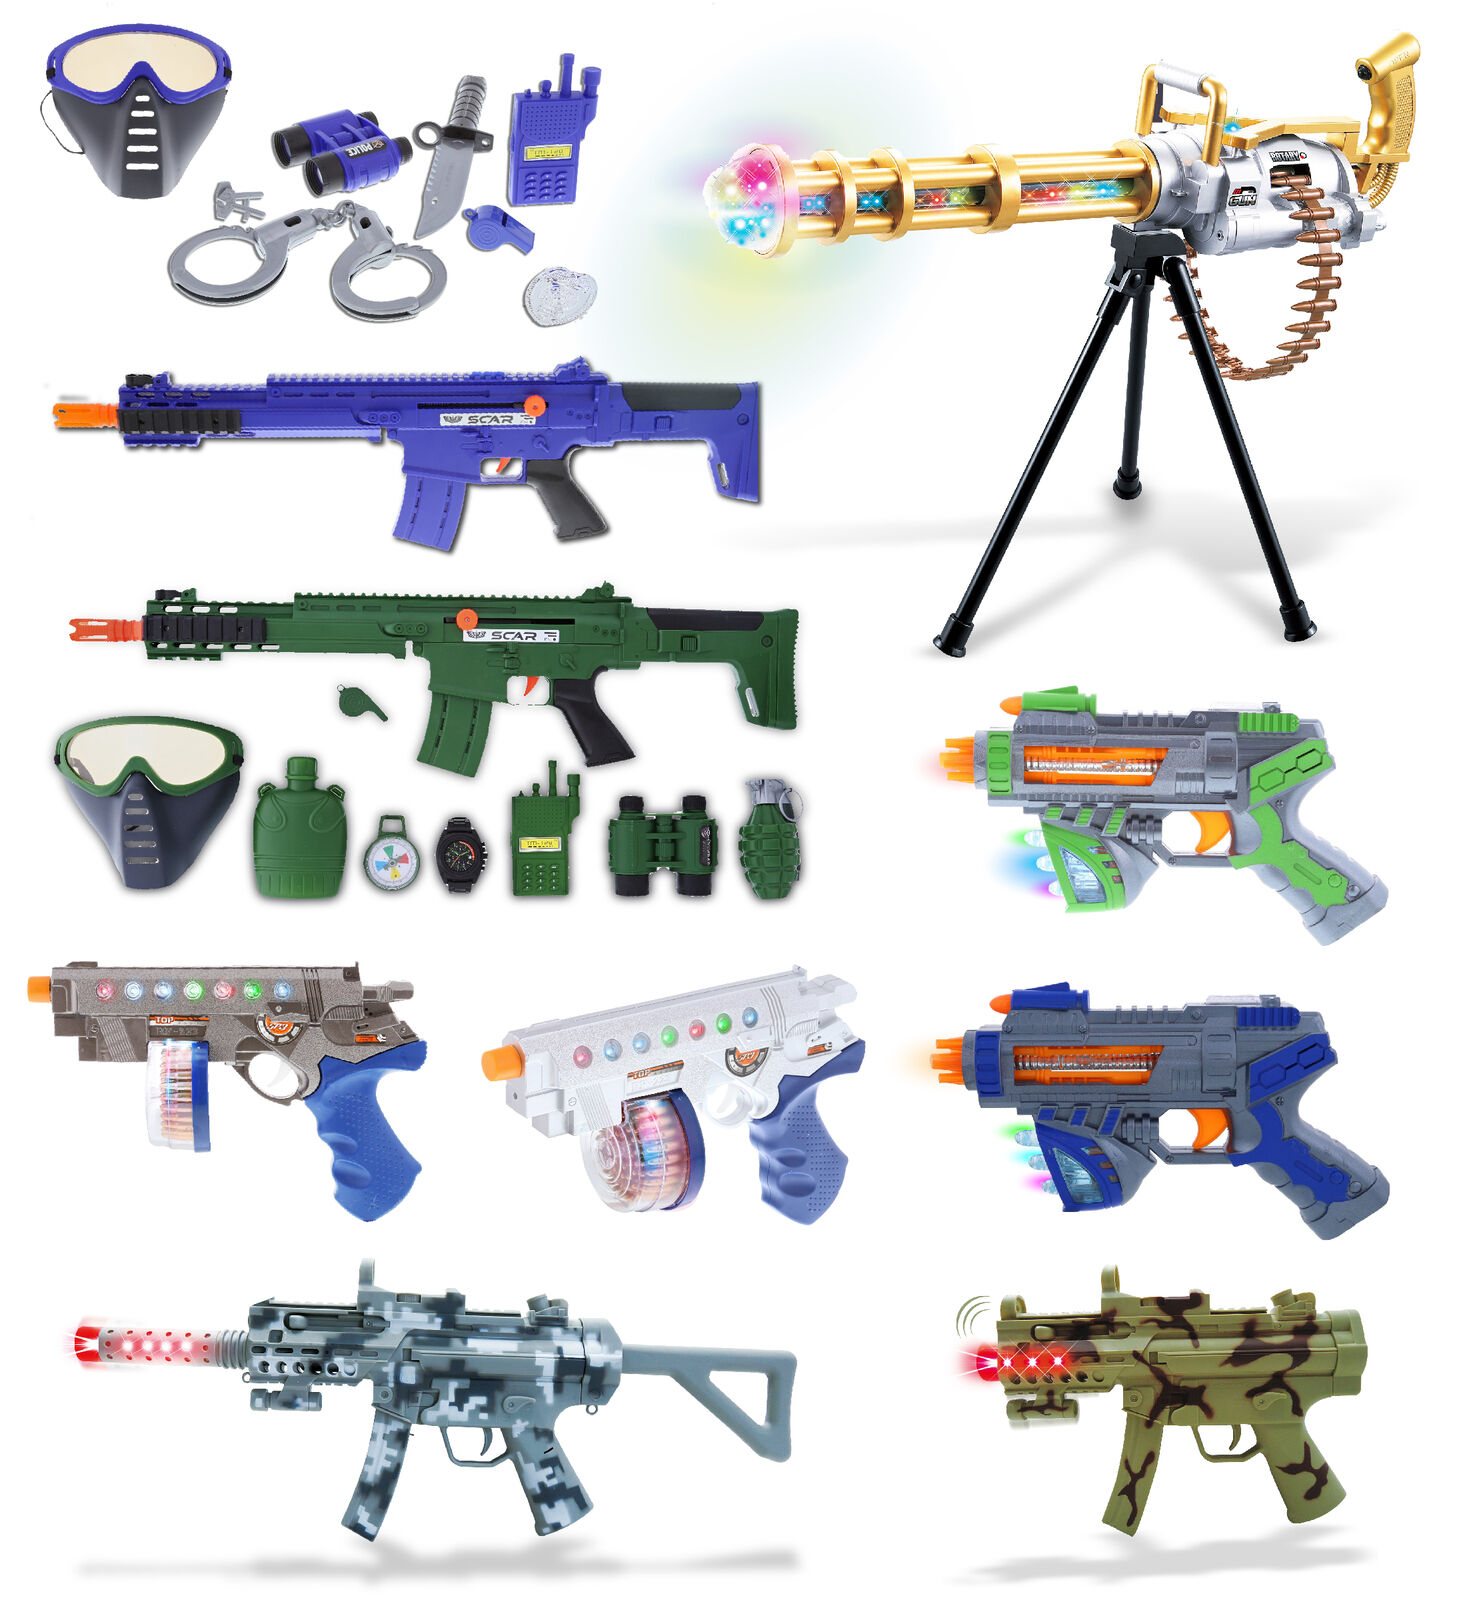 thinkstar Military And Space Combat Light Up Led Toy Gun Set Of 6 – Color May Vary